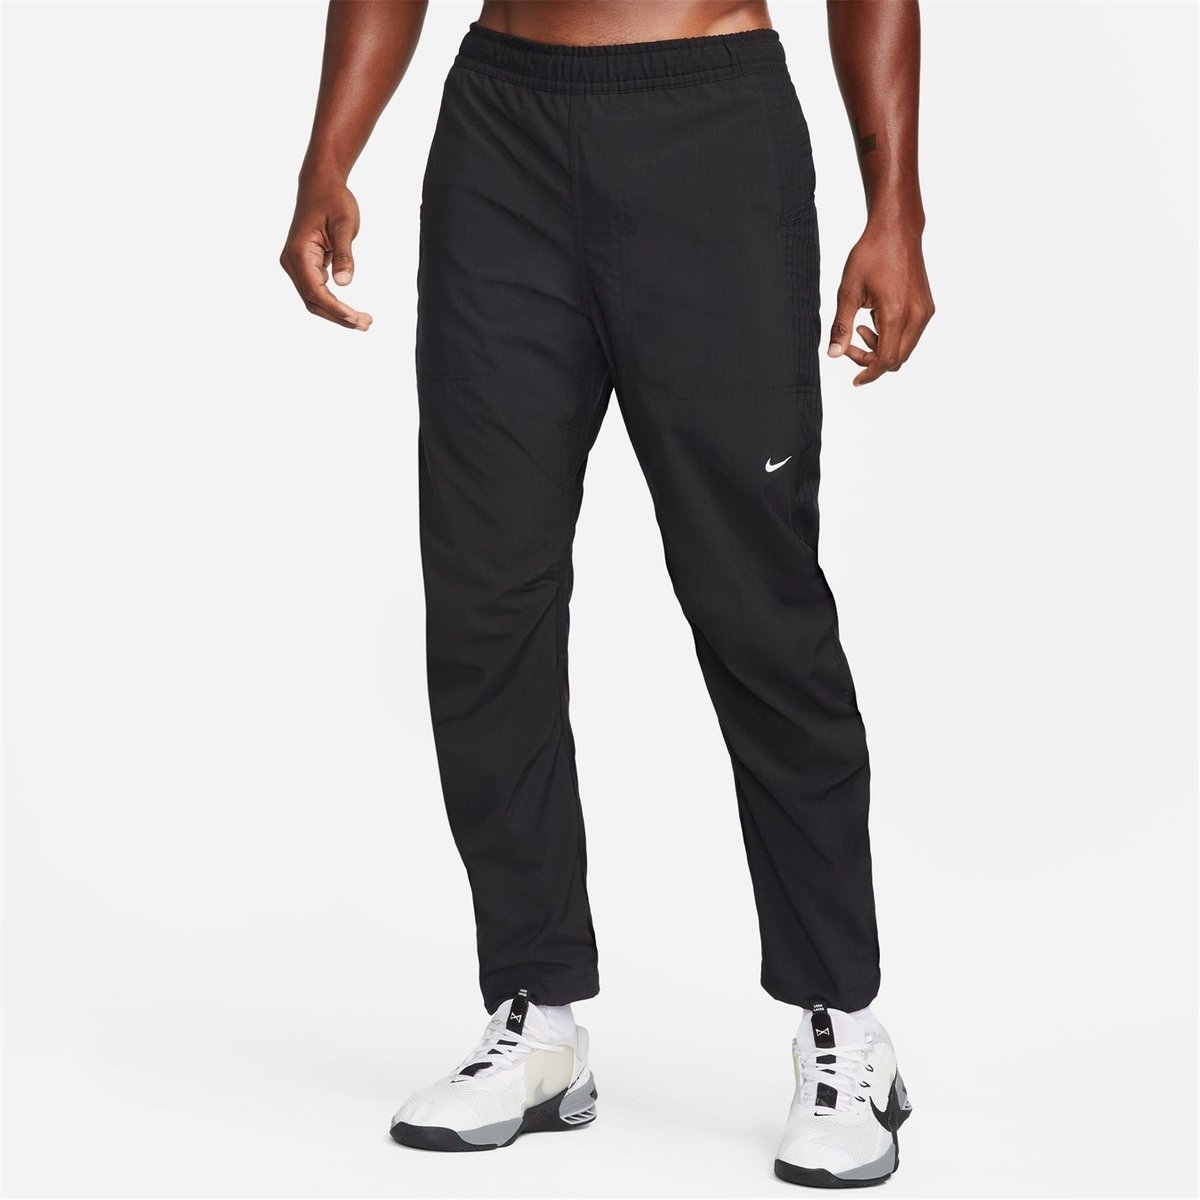 Men's Stylish Comfortable Fit Lower,Men Jogger,Men Pajama Night Pant,Track  Pants For Gym, Running, Athletic, Jogging Yoga Casual Wear Black Colour